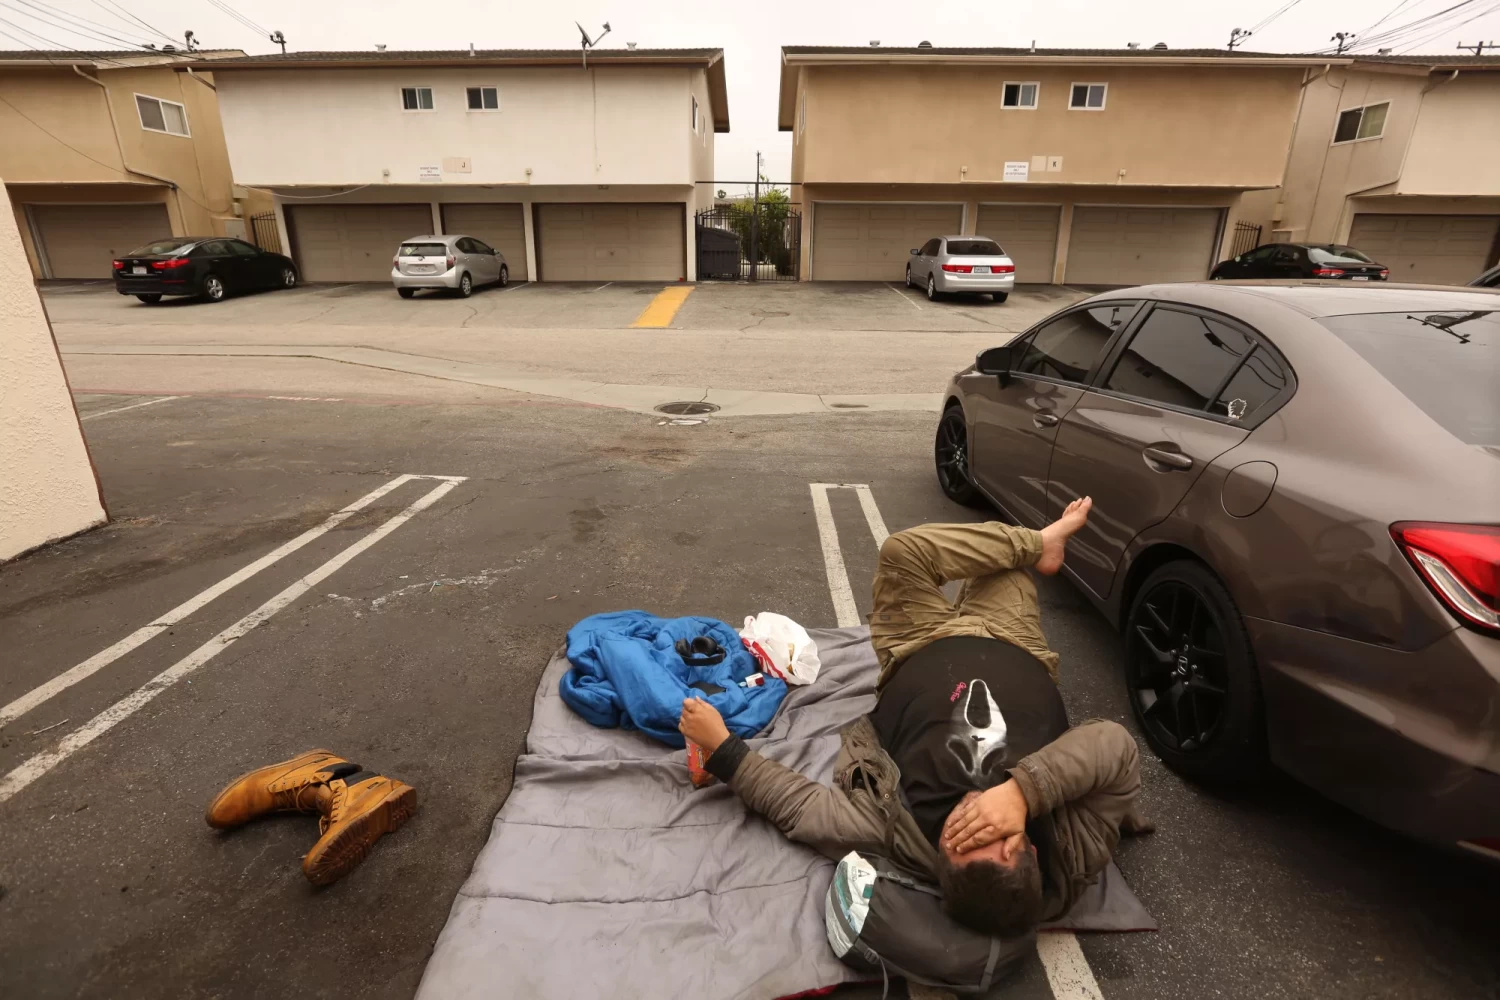 Andrew Truelove rests on a sleeping bag in a parking lot in Torrance on May 23.(Genaro Molina / Los Angeles Times)